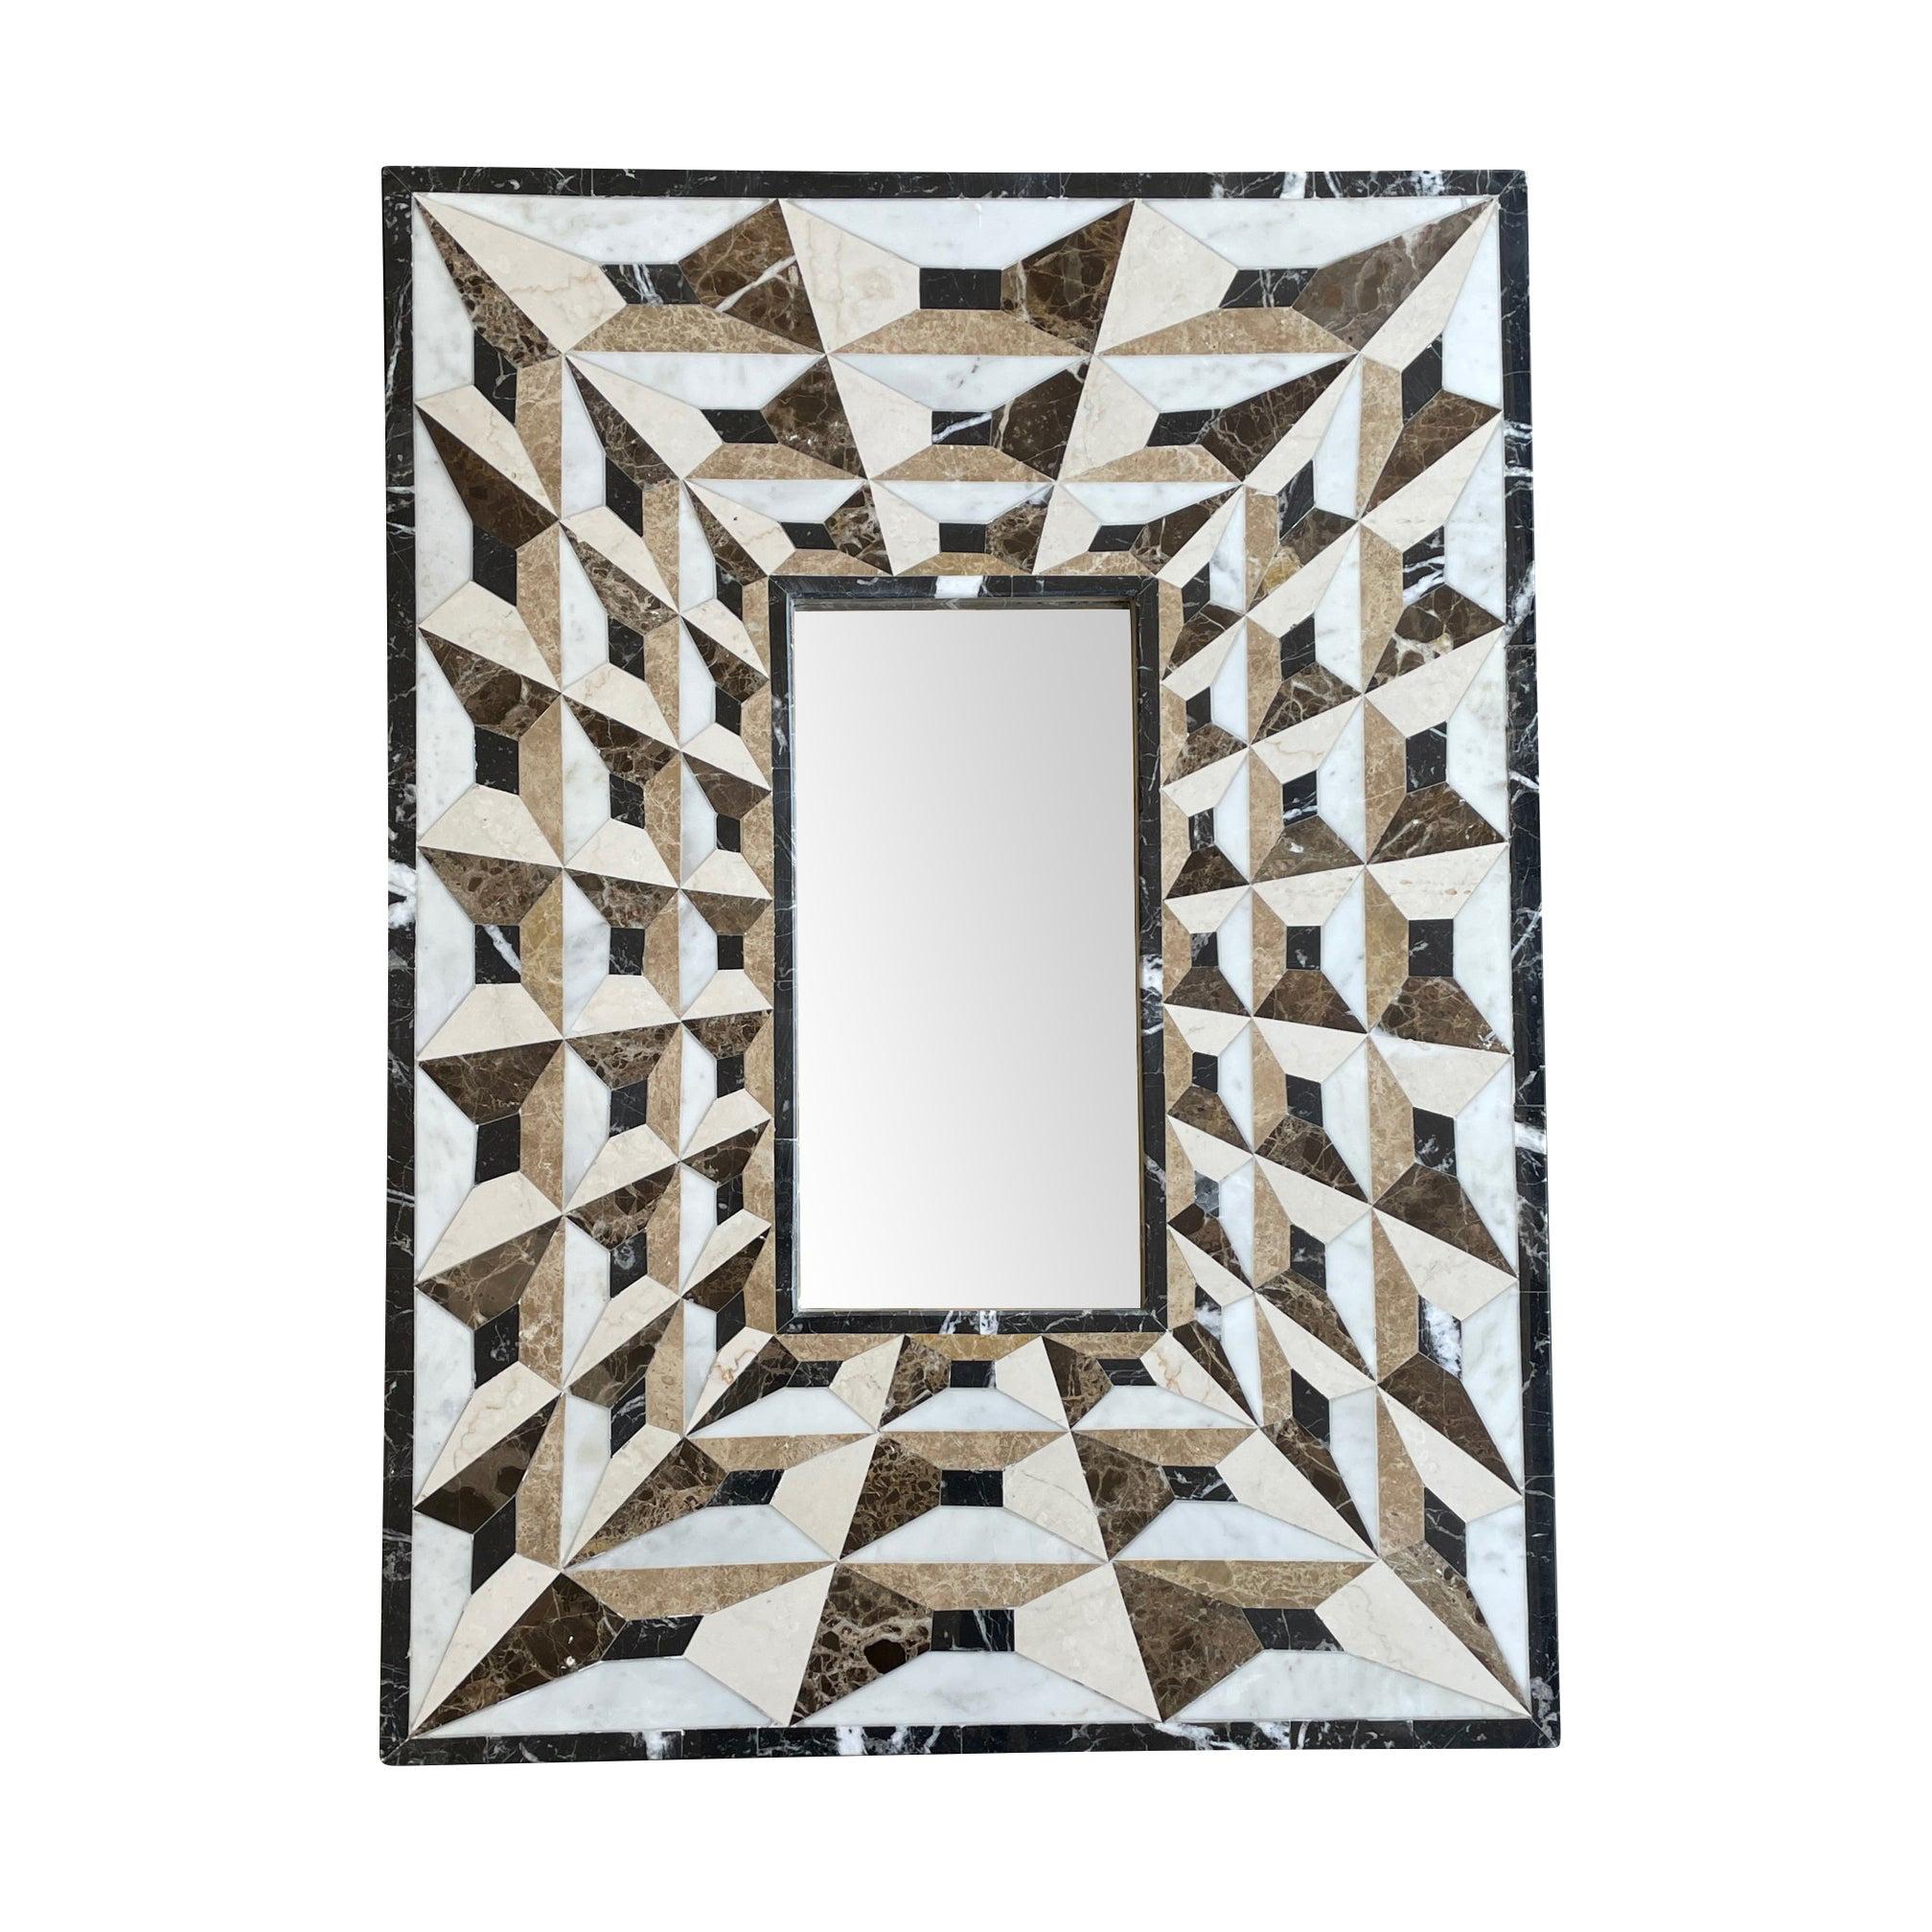 Art Deco Mirror with Tessellated Marble Surround Creating Optical Perspective